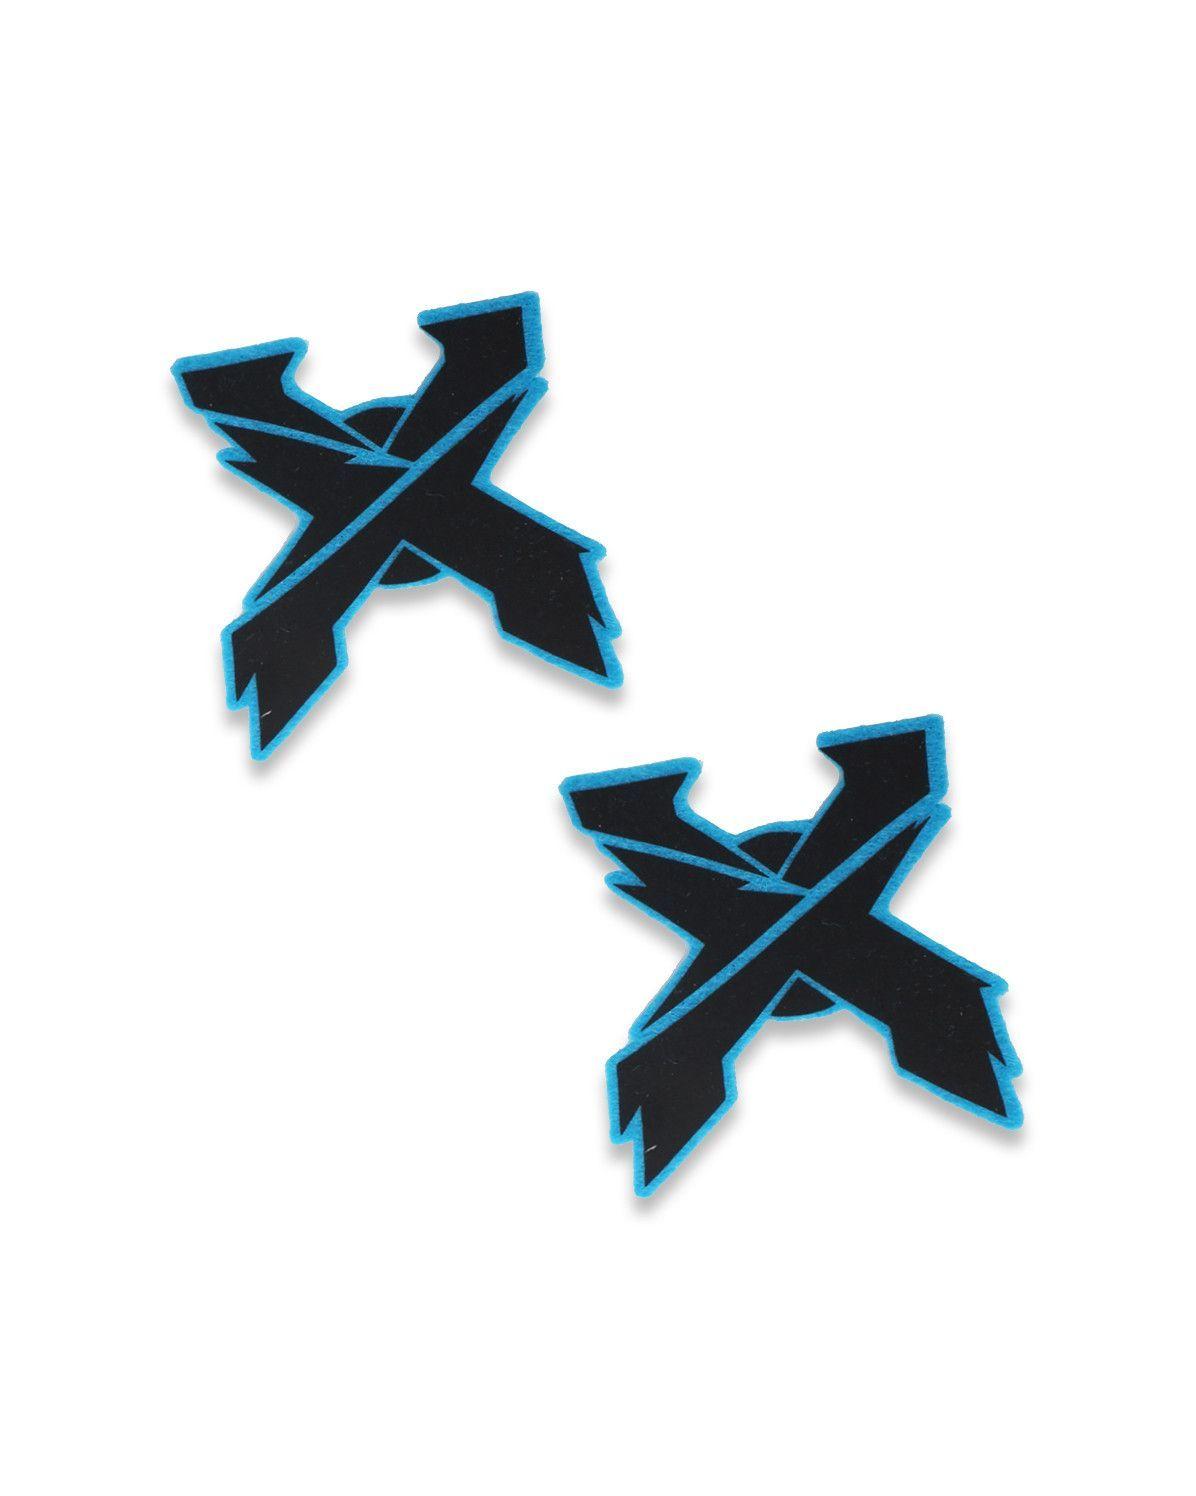 Excision Logo - Excision X Logo Pastease | Rave :) | Logos, Store fronts